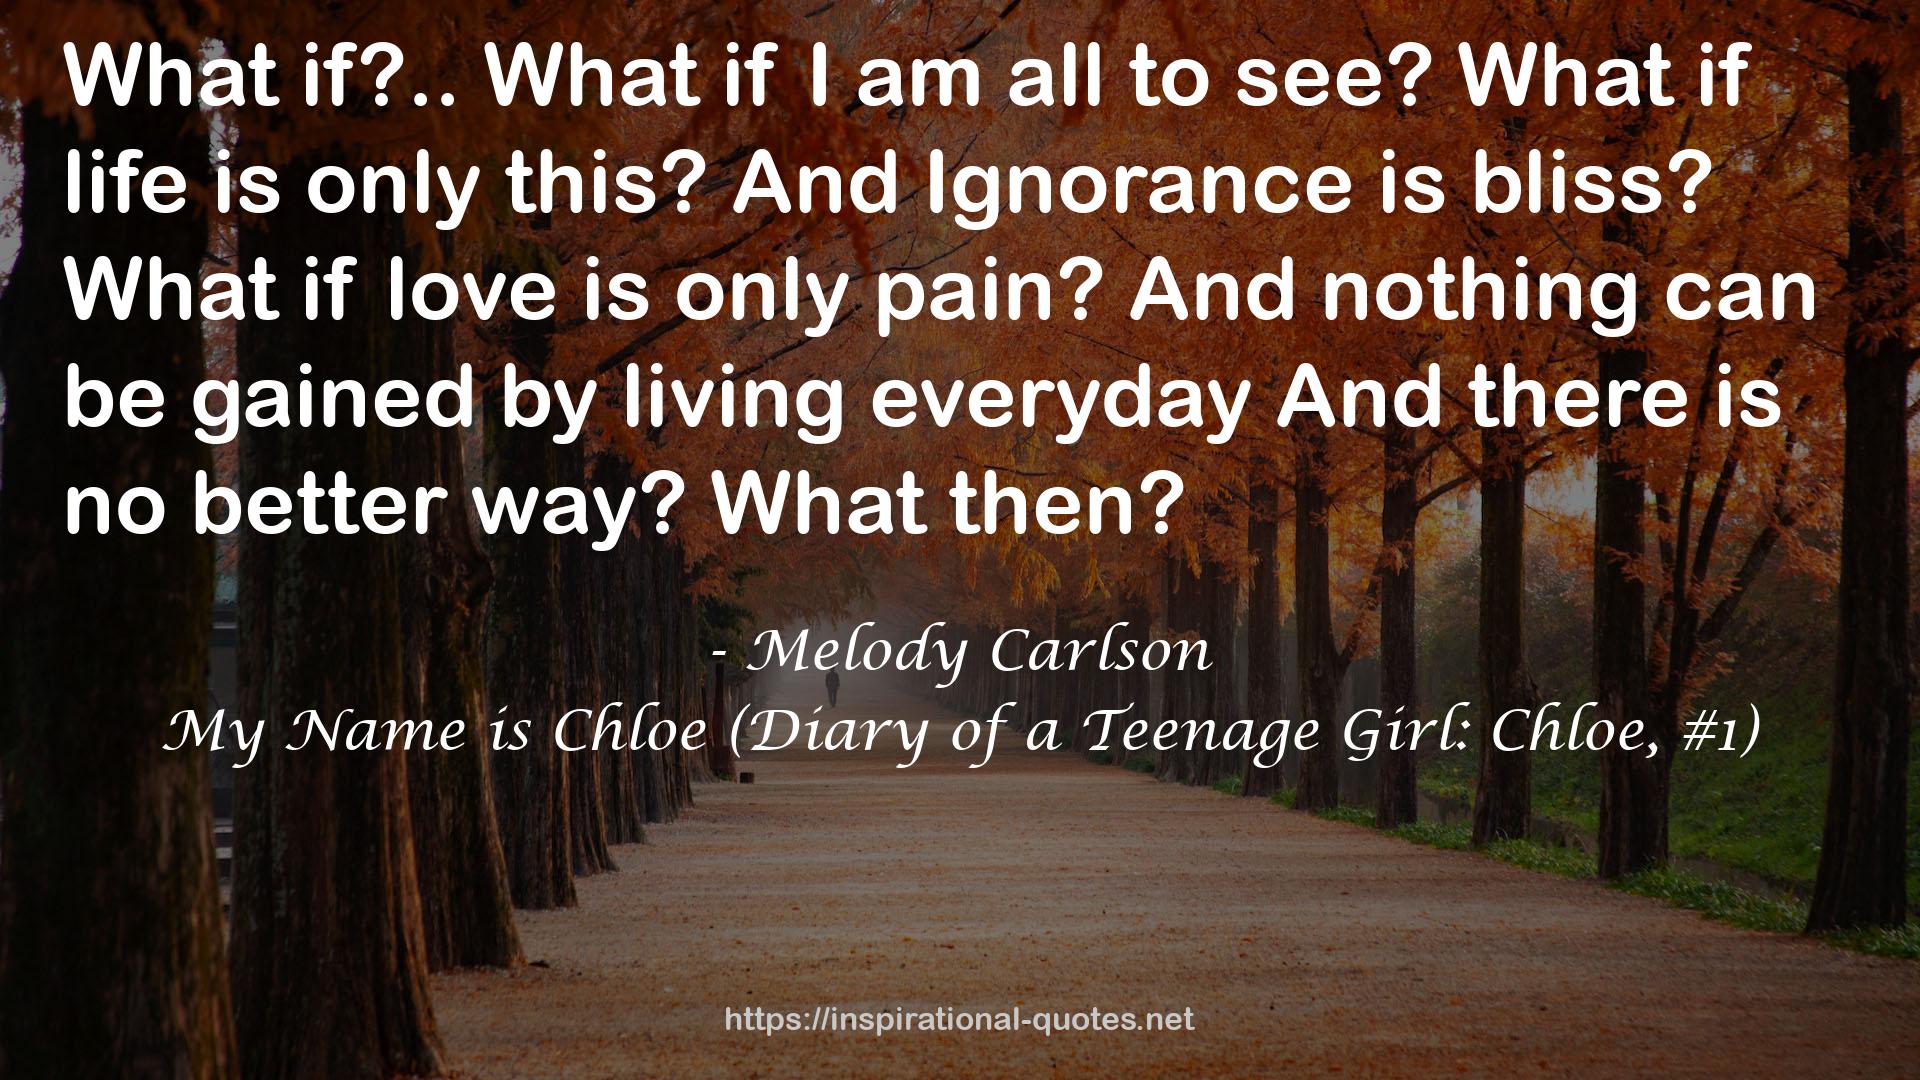 My Name is Chloe (Diary of a Teenage Girl: Chloe, #1) QUOTES